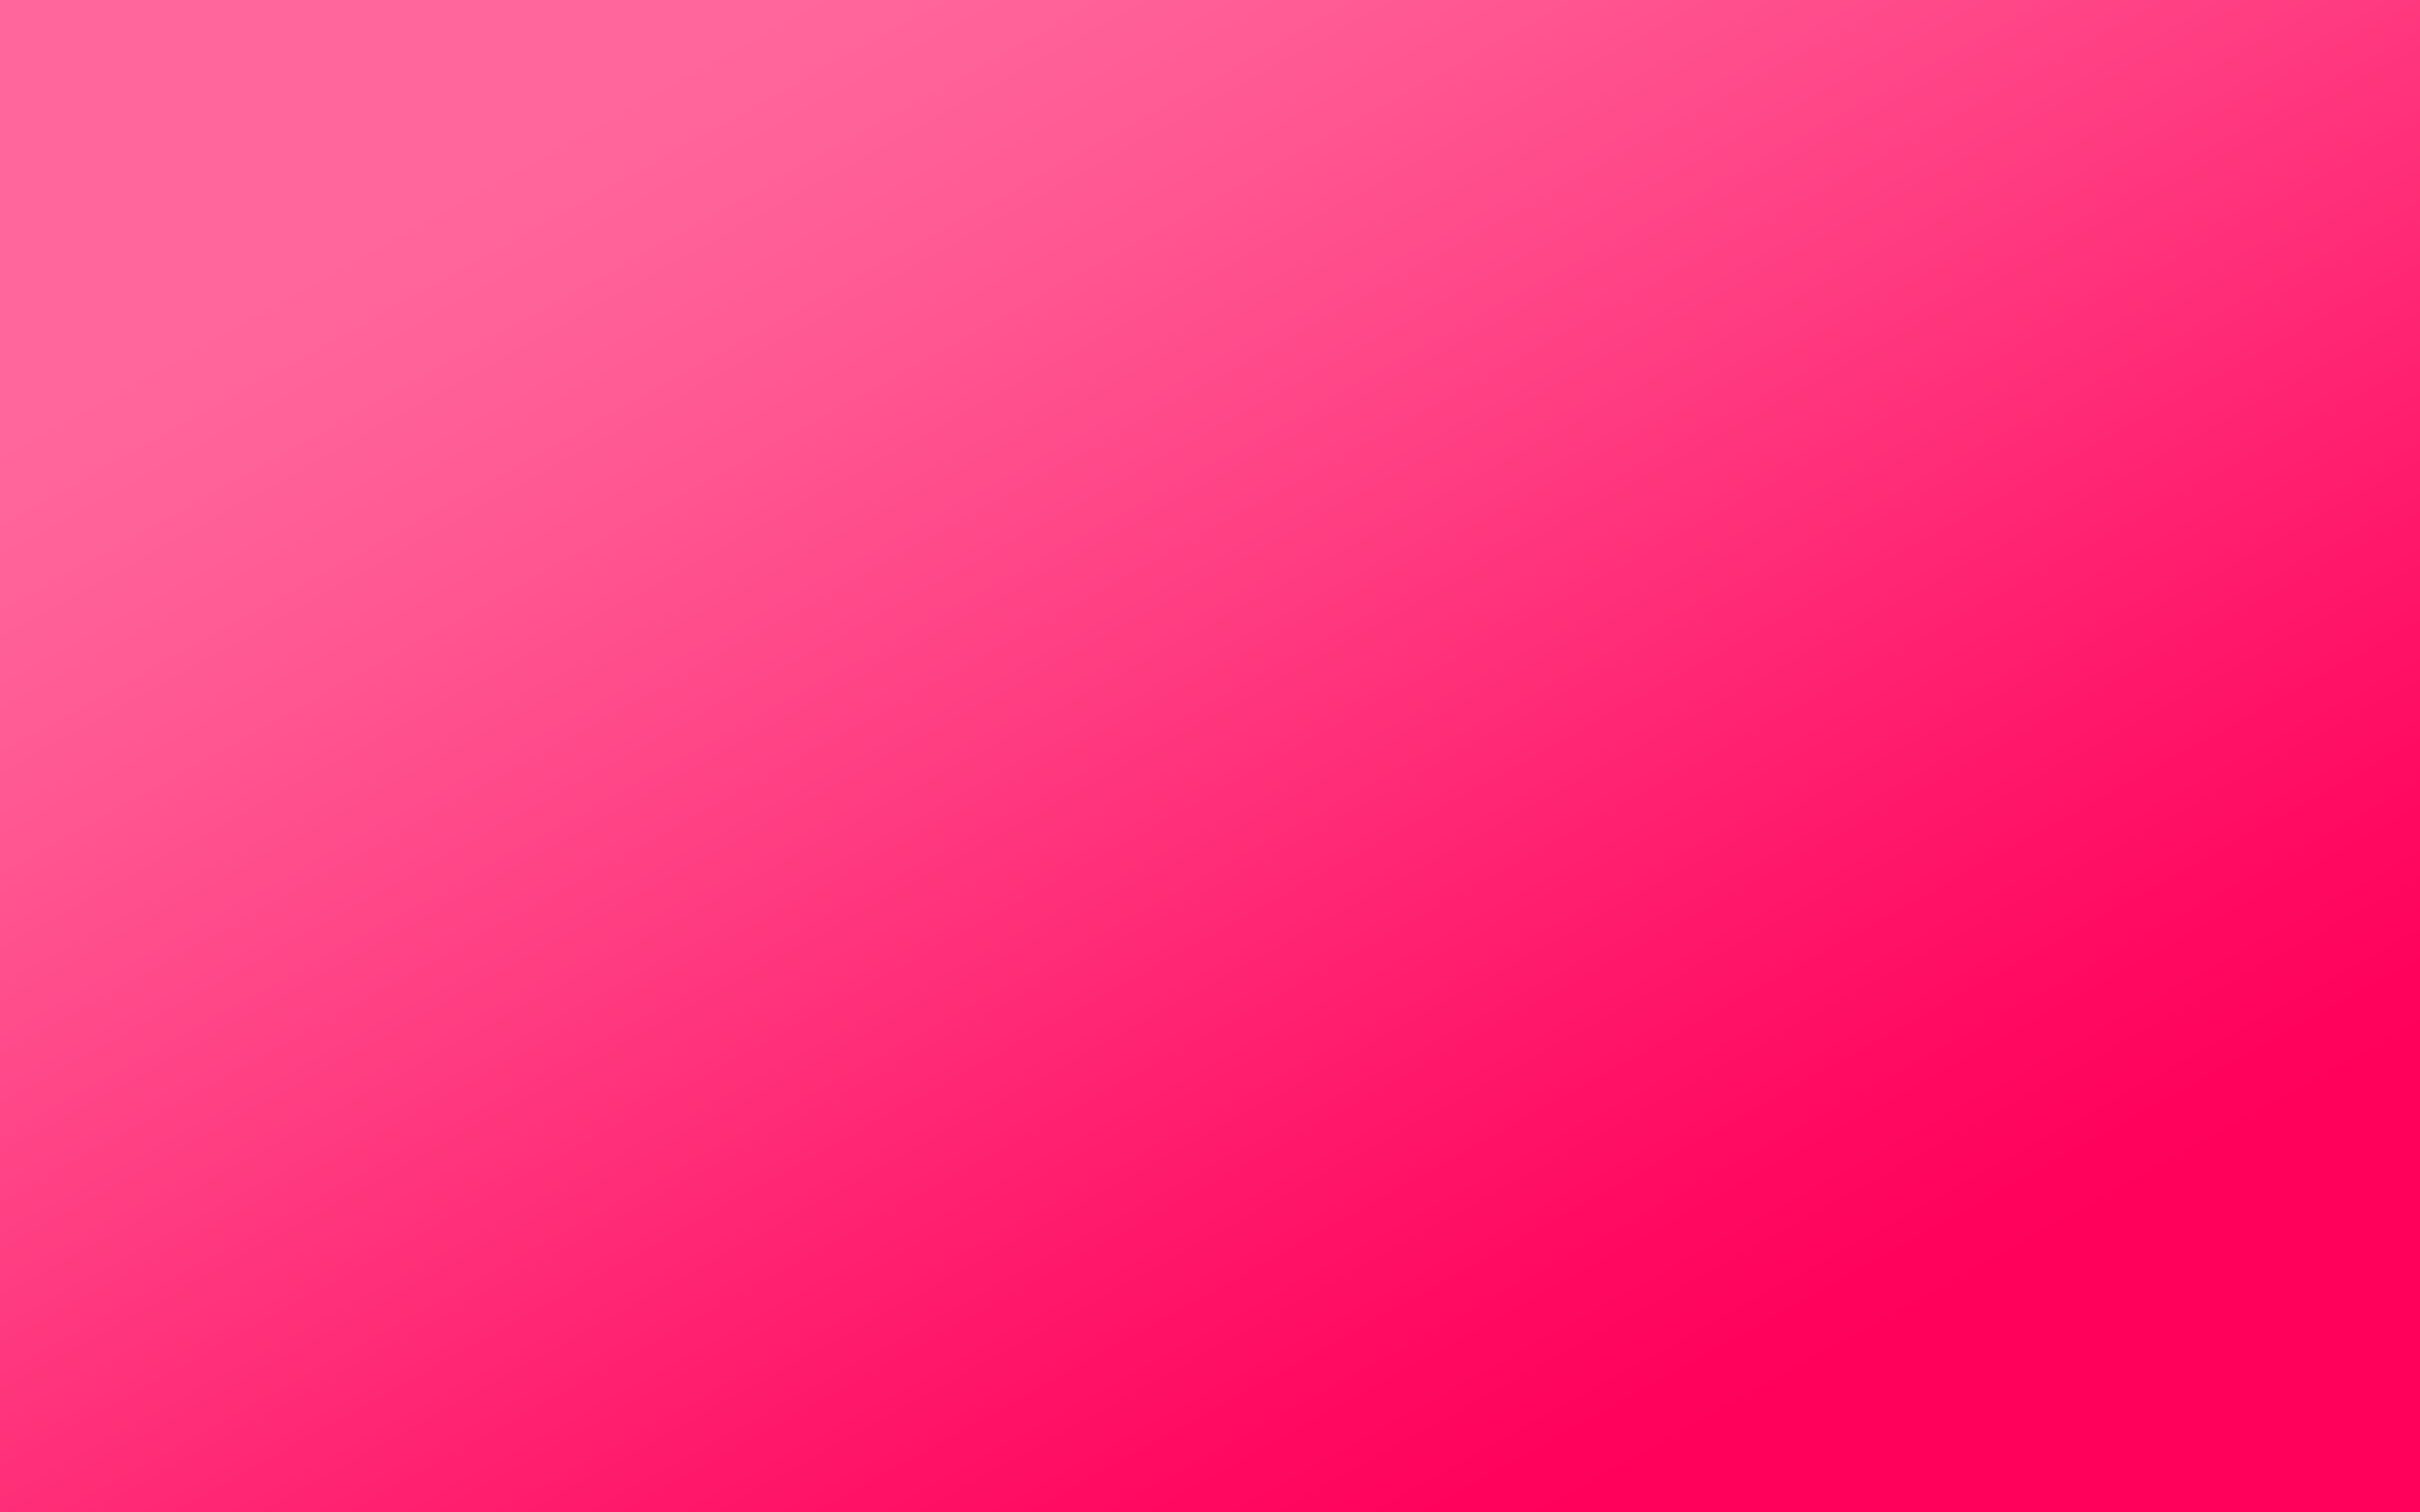 Pink backgrounds free download.